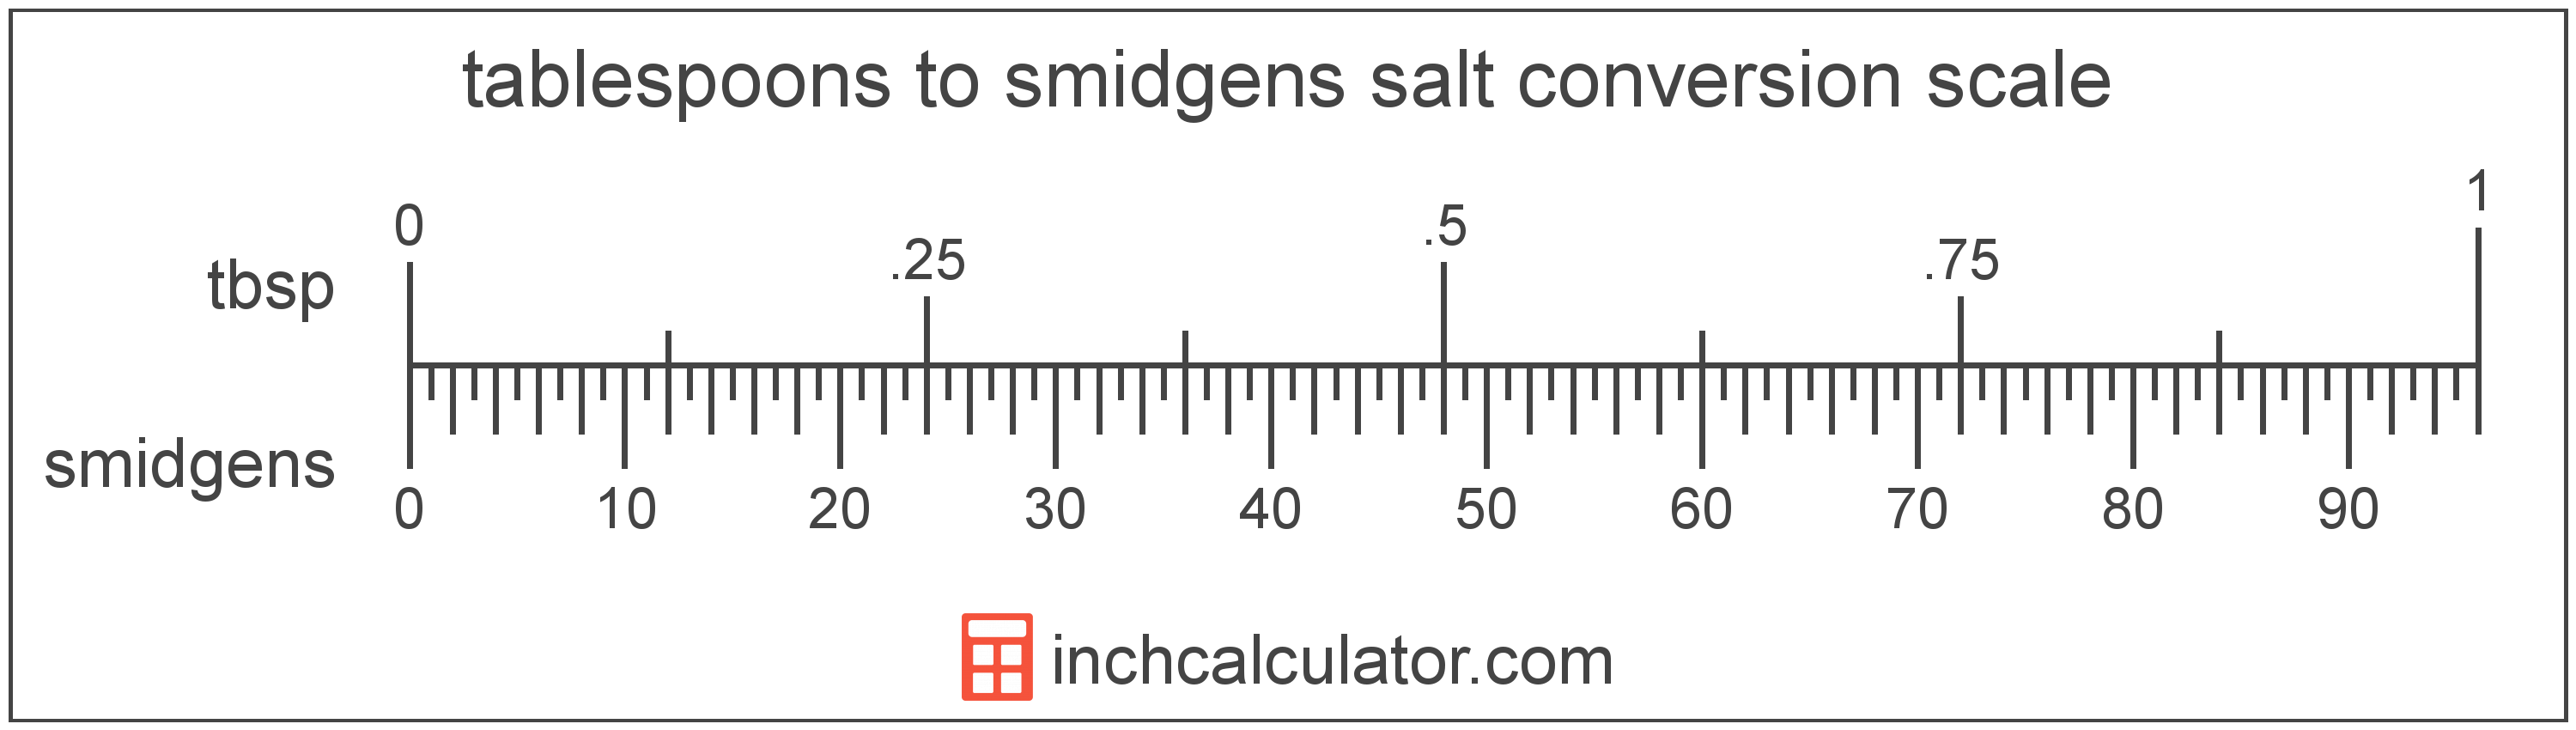 conversion scale showing tablespoons and equivalent smidgens amount of salt values